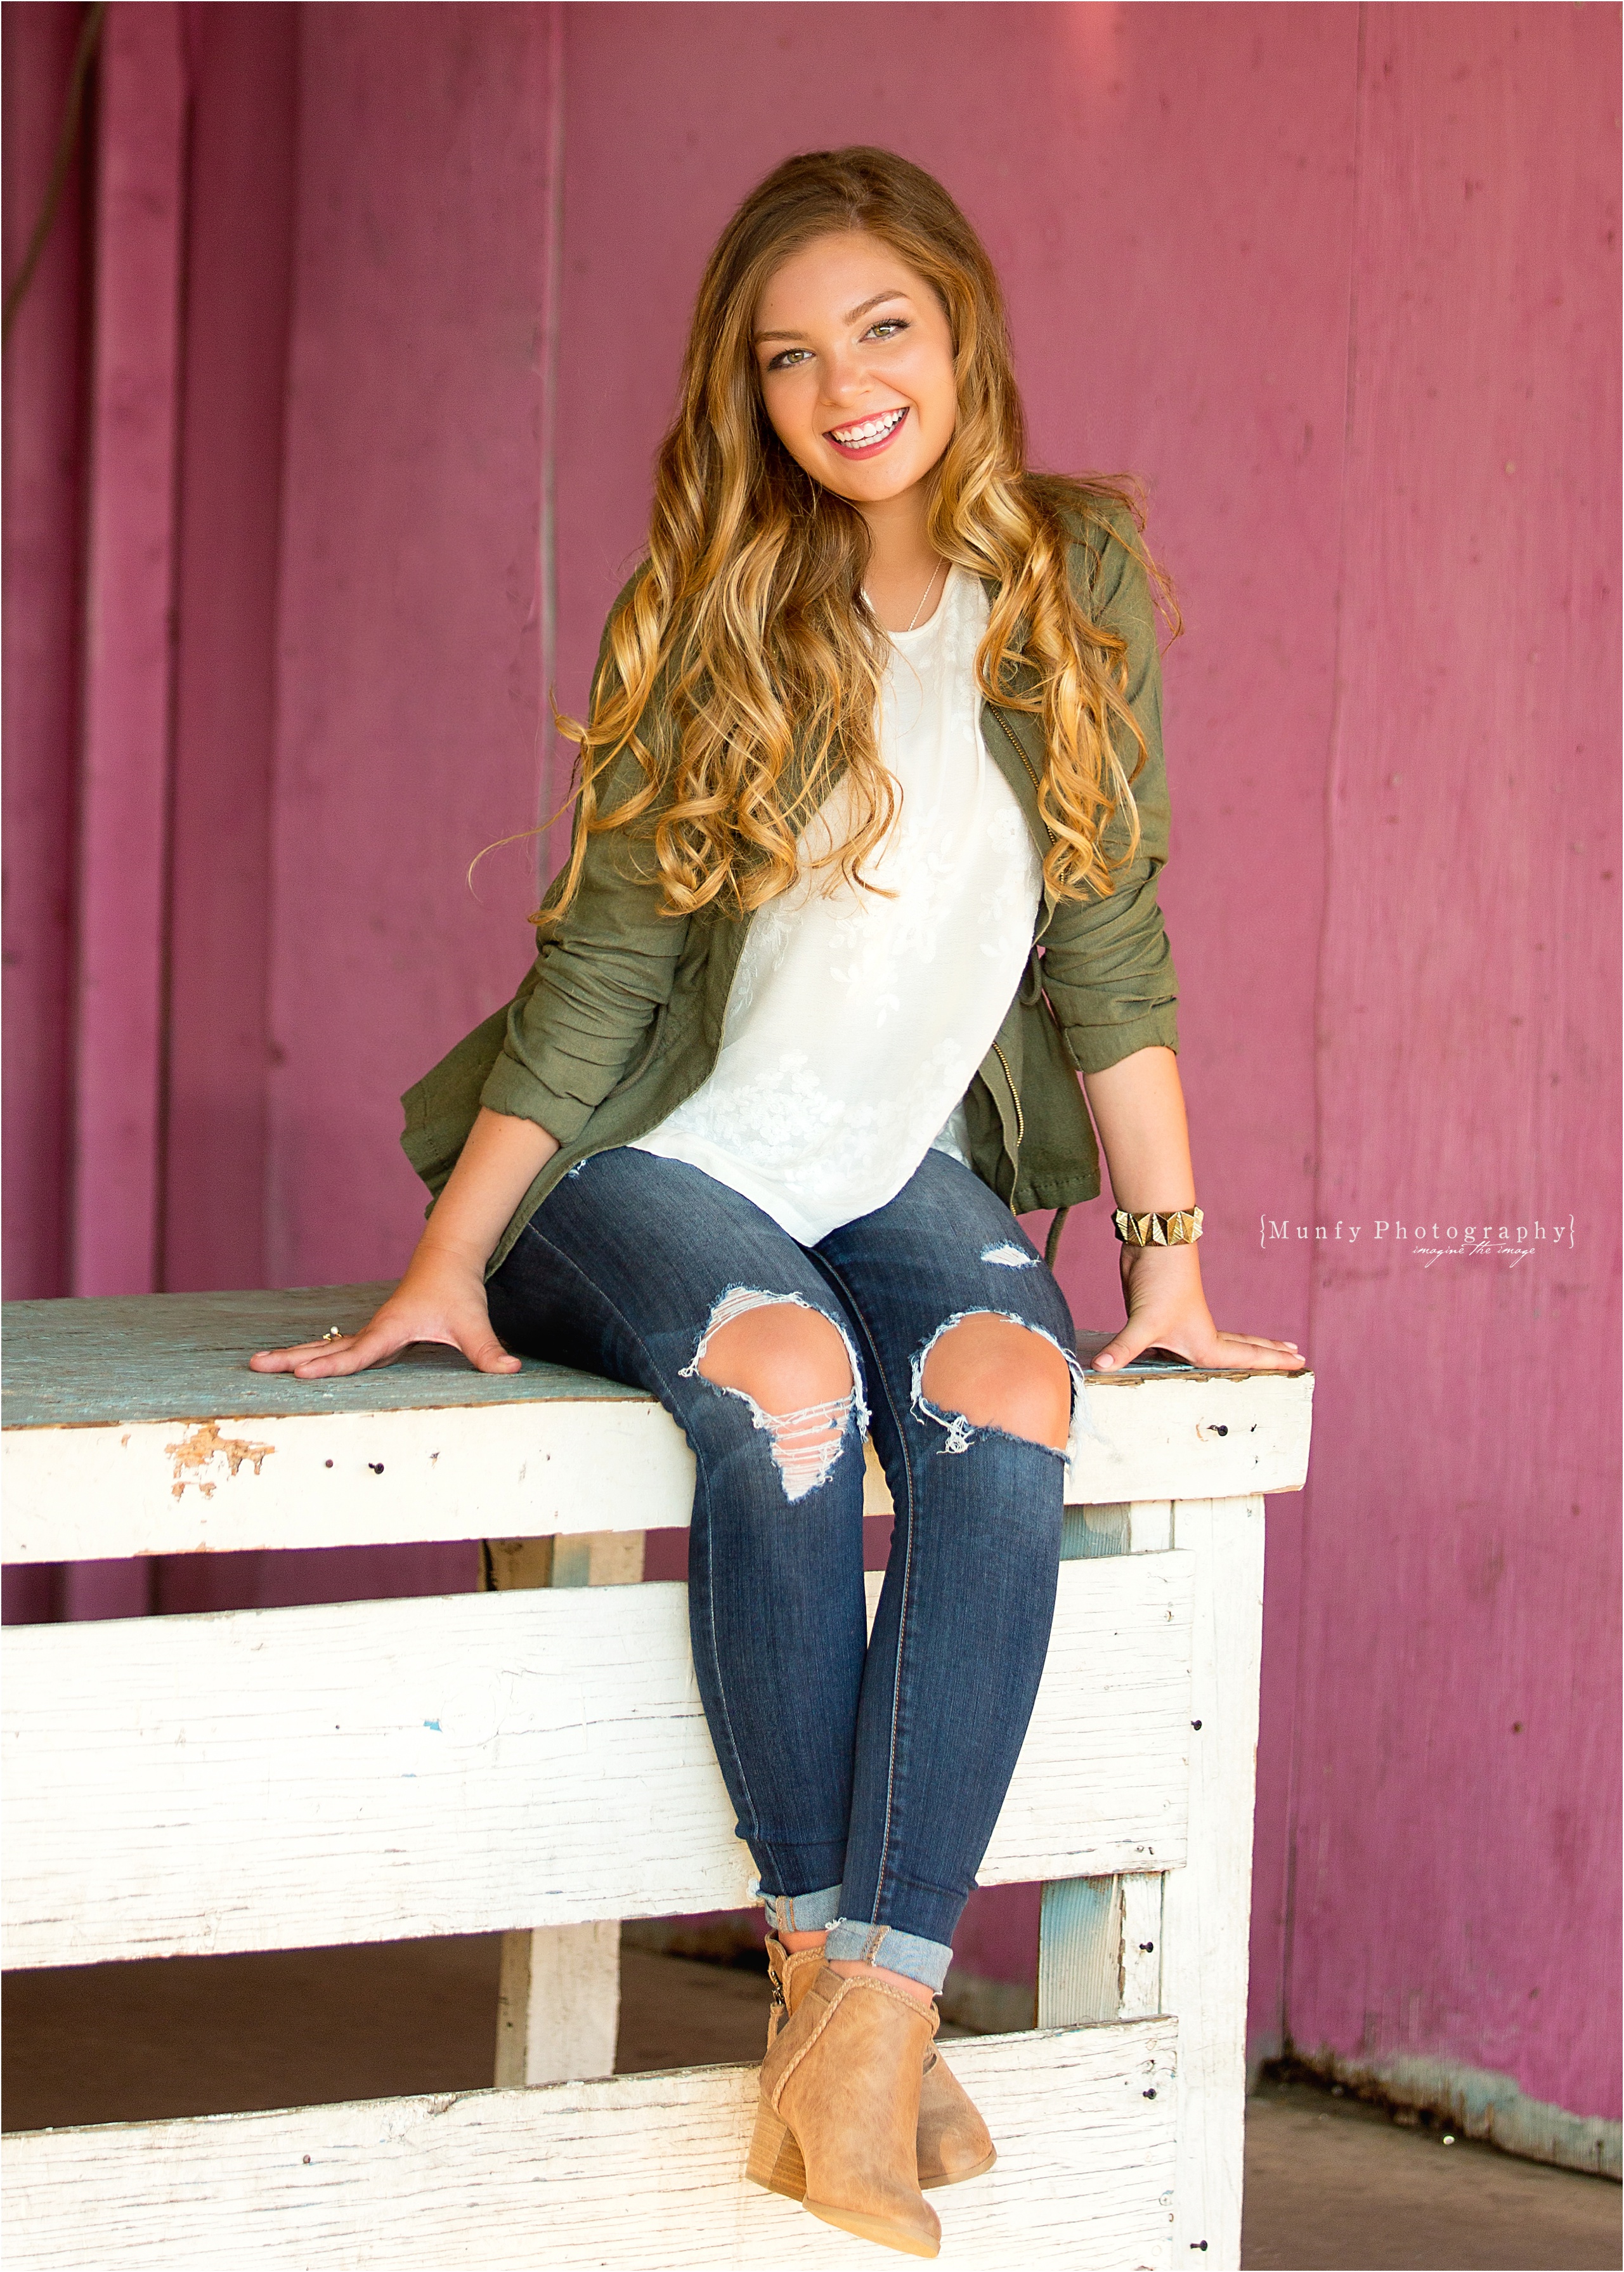 Munfy Photography » Specializing in creative and beautiful high school ...